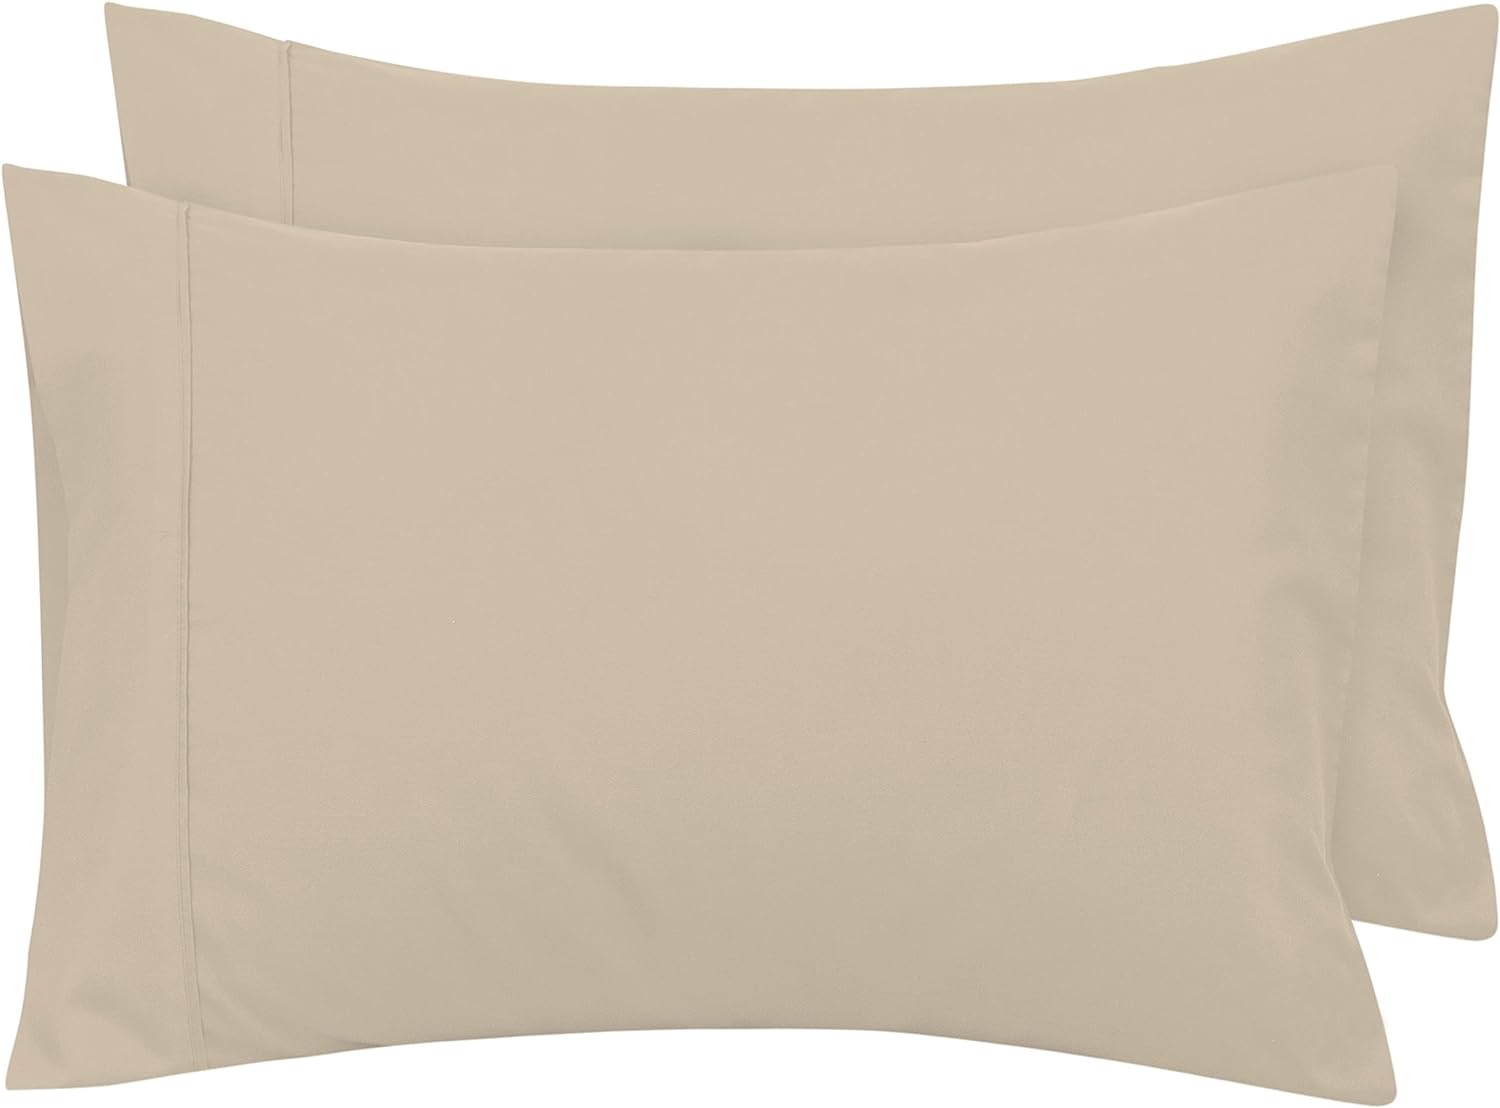 Royale Linens King Pillowcase Set of 2 - Bed Pillow Cover - 20" x 40" -Sand Pillowcases - 1800 Brushed Microfiber, Wrinkle & Fade Resistant - Soft & Cozy- King Size Pillow Case (King, Sand)